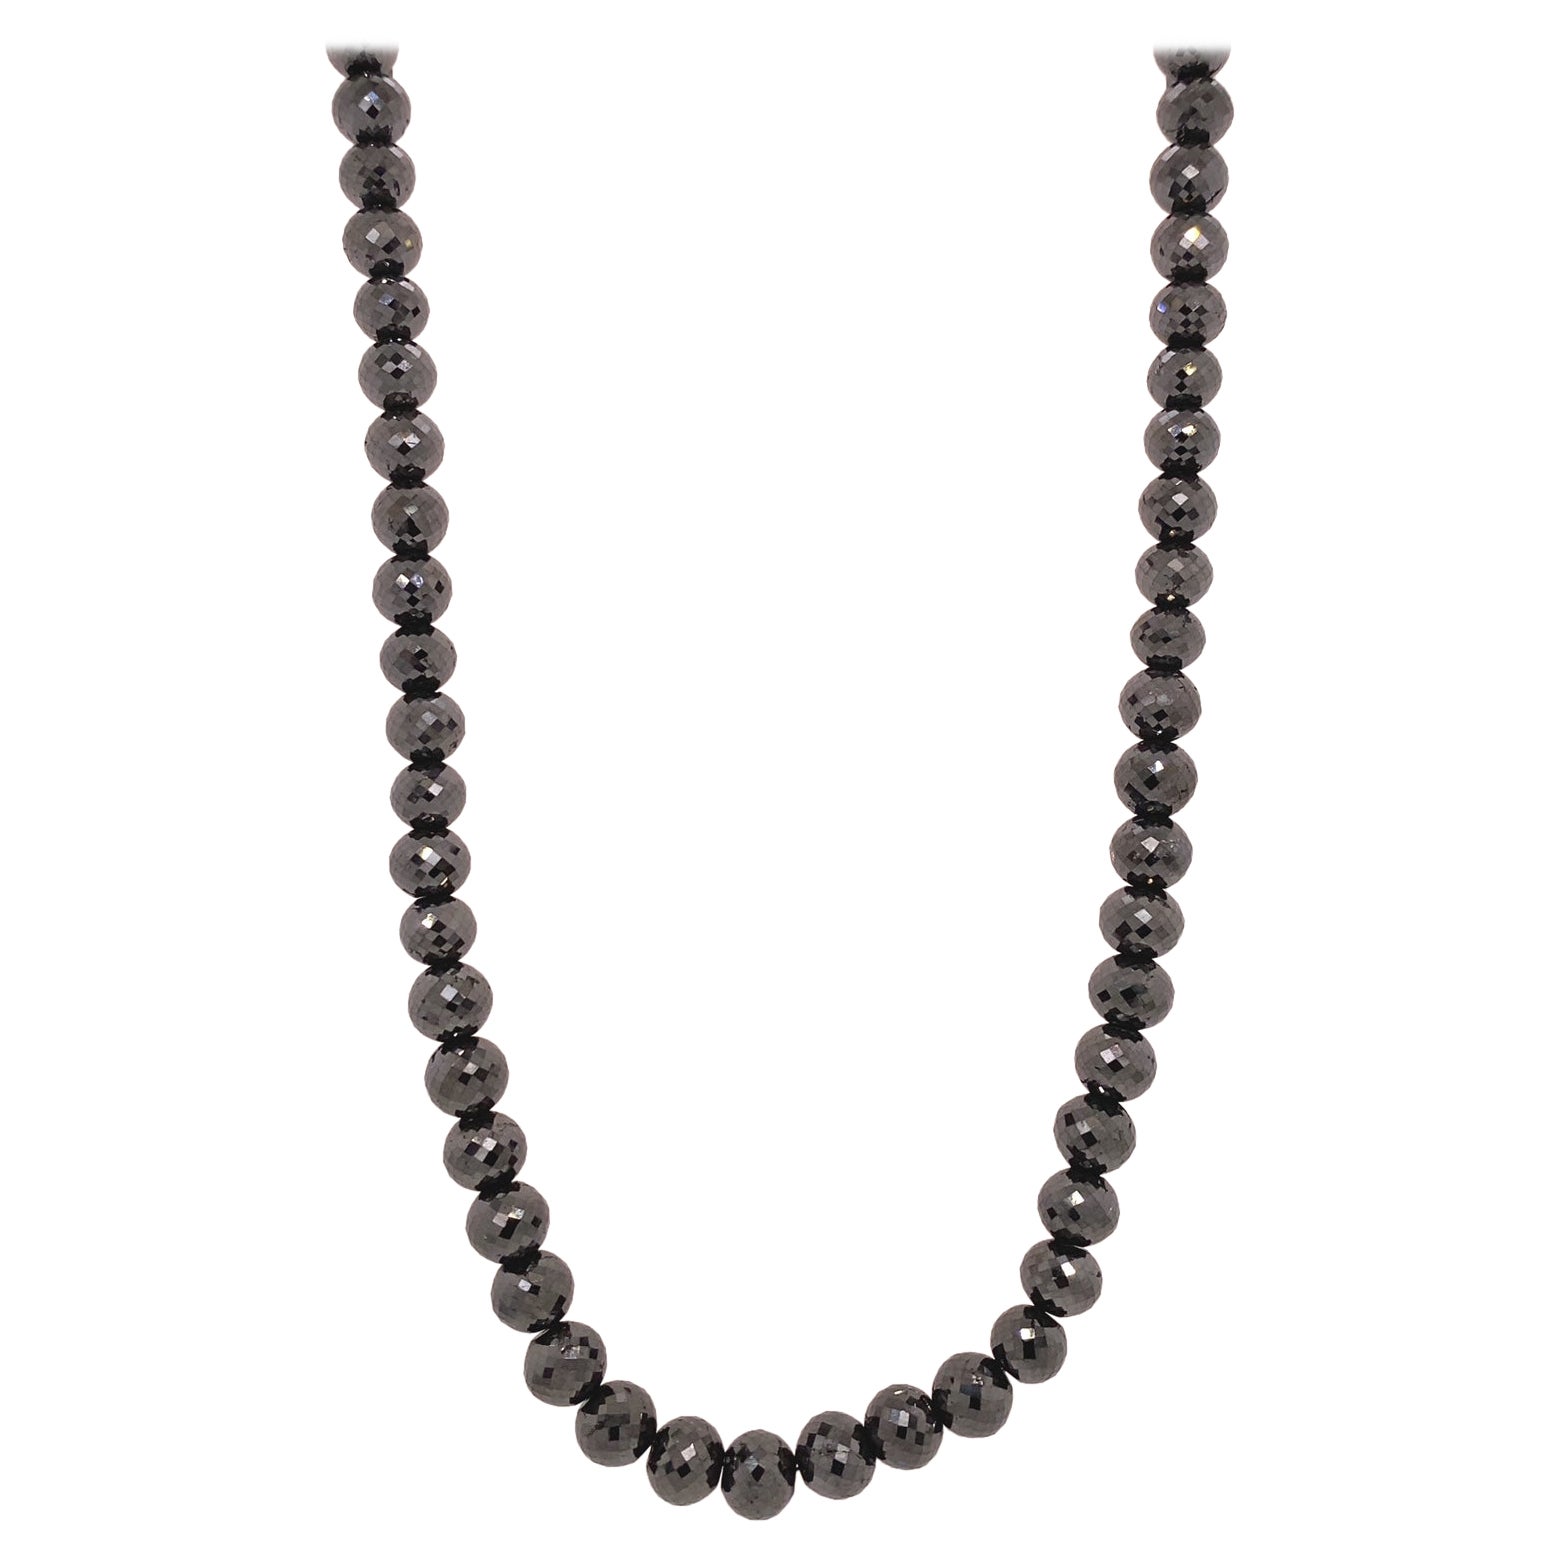 100.17 Carat Black Diamond Faceted Necklace with a White Gold Diamond Clasp For Sale